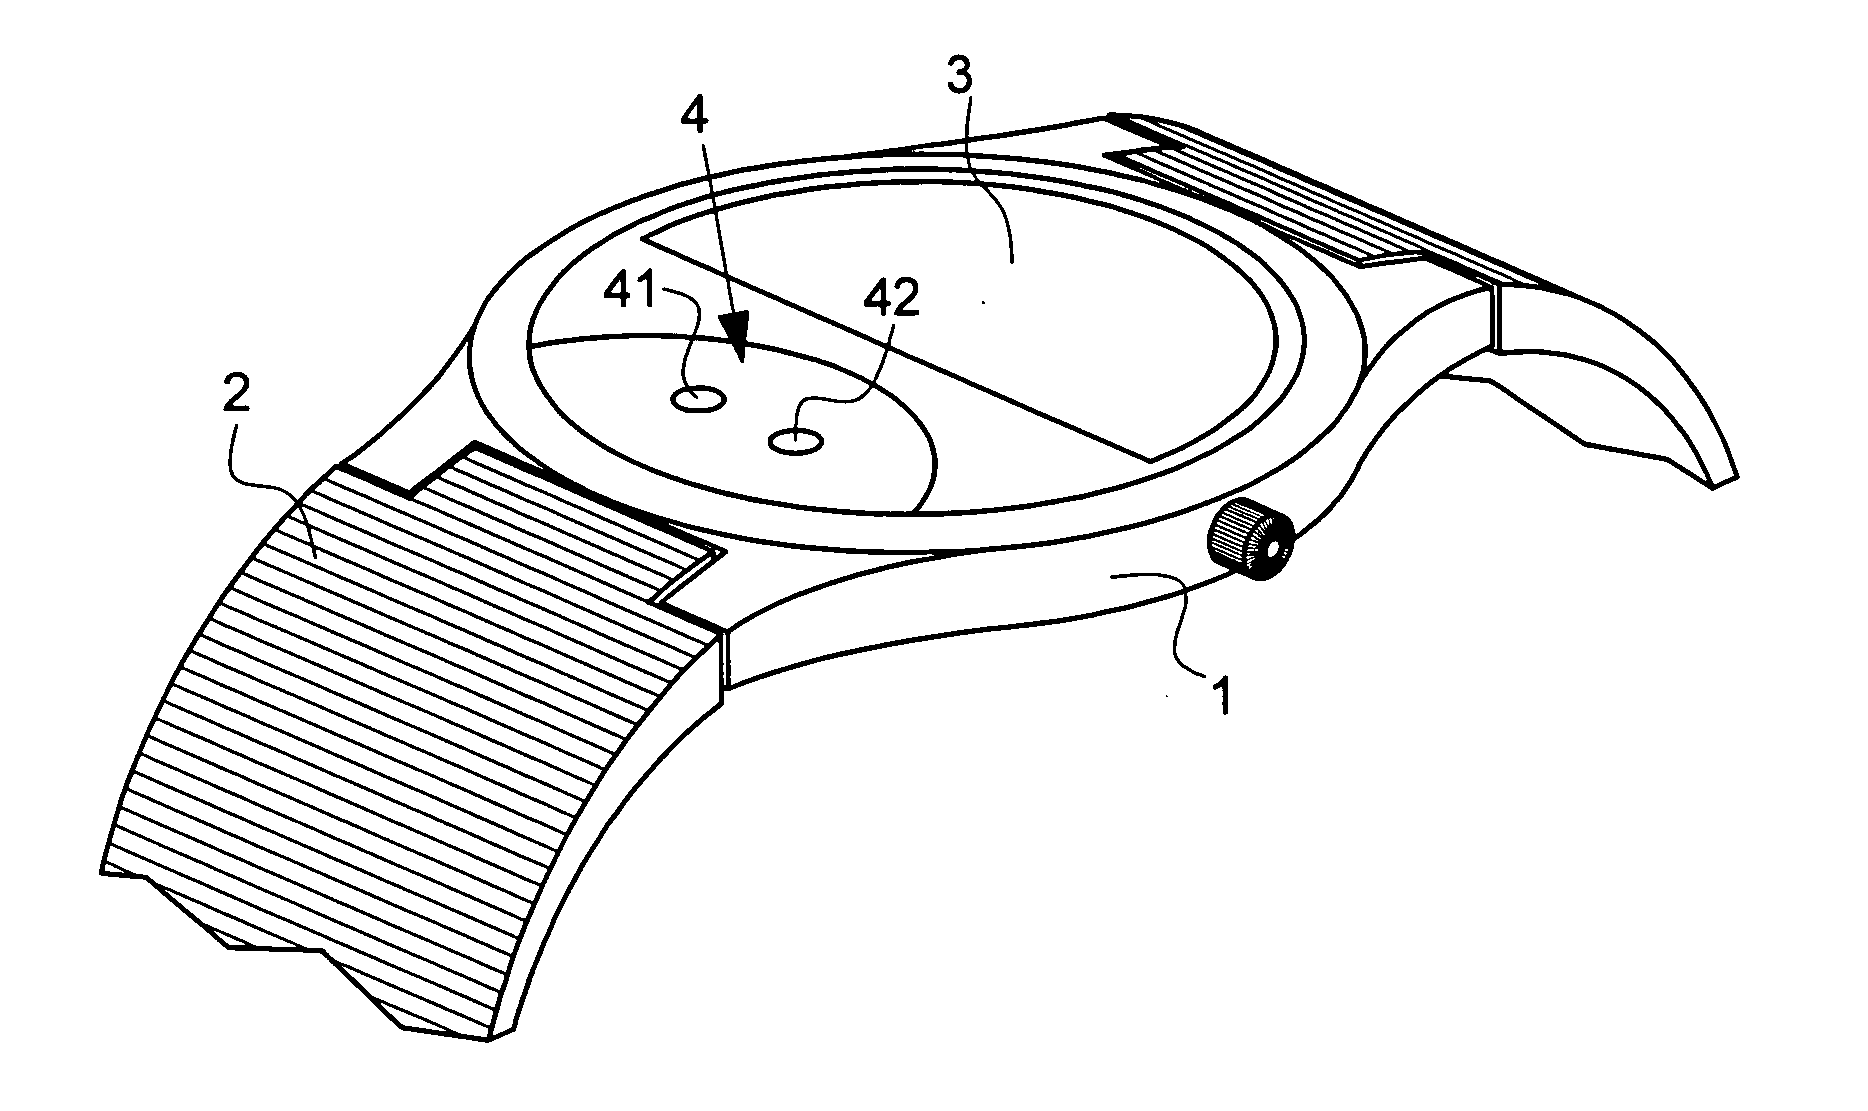 Portable instrument provided with an optical device for measuring a physiological quantity and means for transmitting and/or receiving data